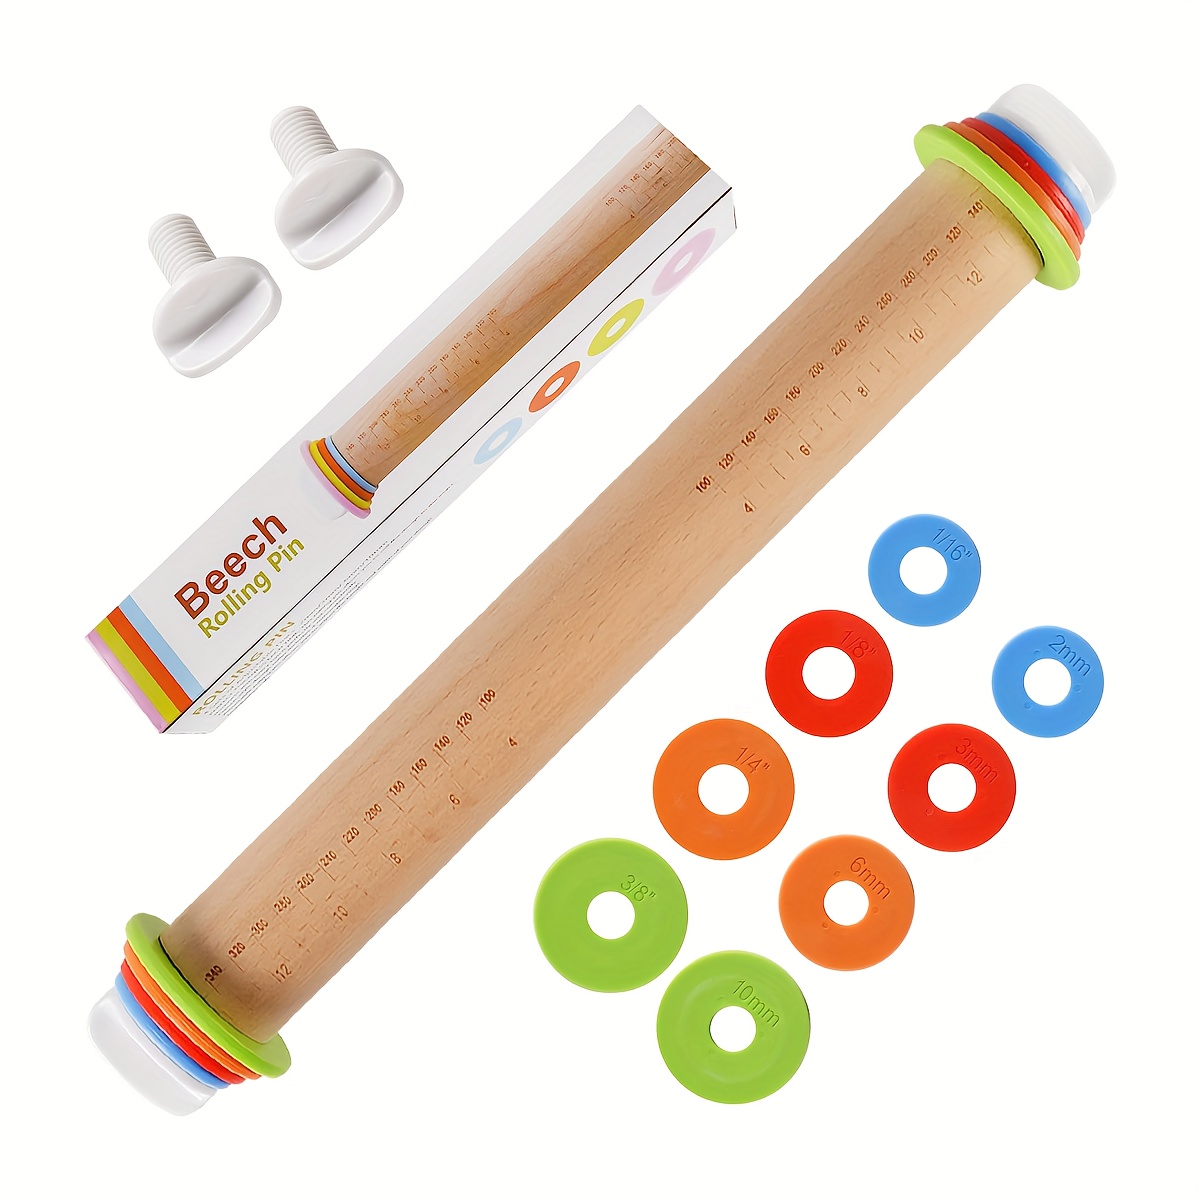 

Set, Wood Rolling Pin With 4 Adjustable Thickness Rings, Non-stick Dough Roller For Baking, 17 Inch Pizza Roller For Kitchen Supplies, Handle Press Design For Fondant, Pizza, Pie Crust, Cookie, Pastry